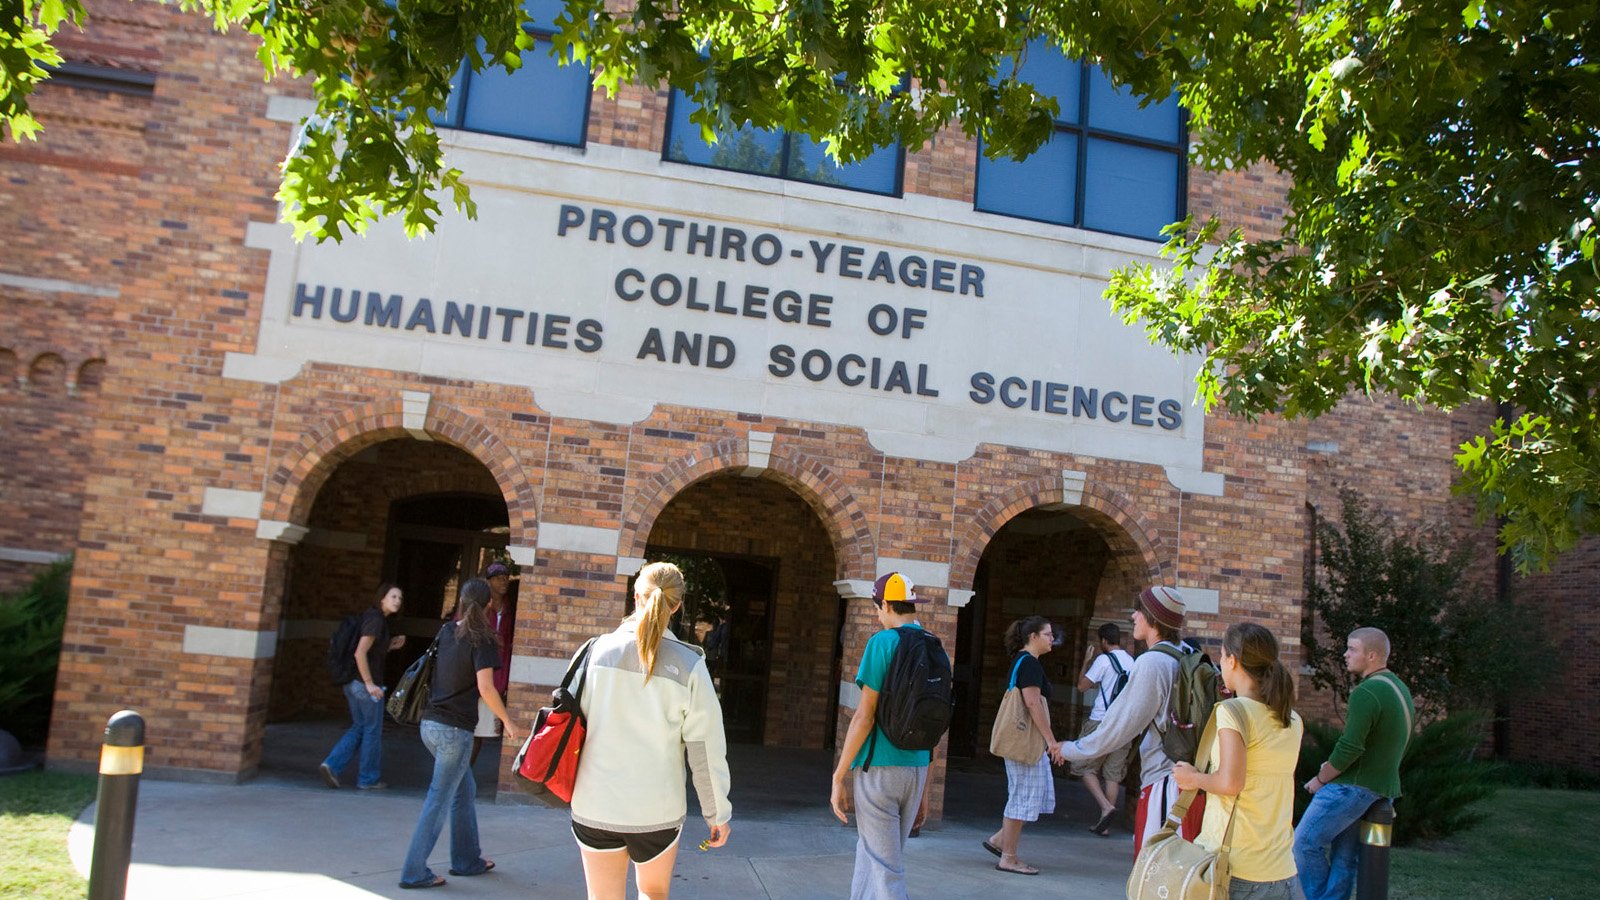 Prothro-Yeager College of Humanities & Social Sciences